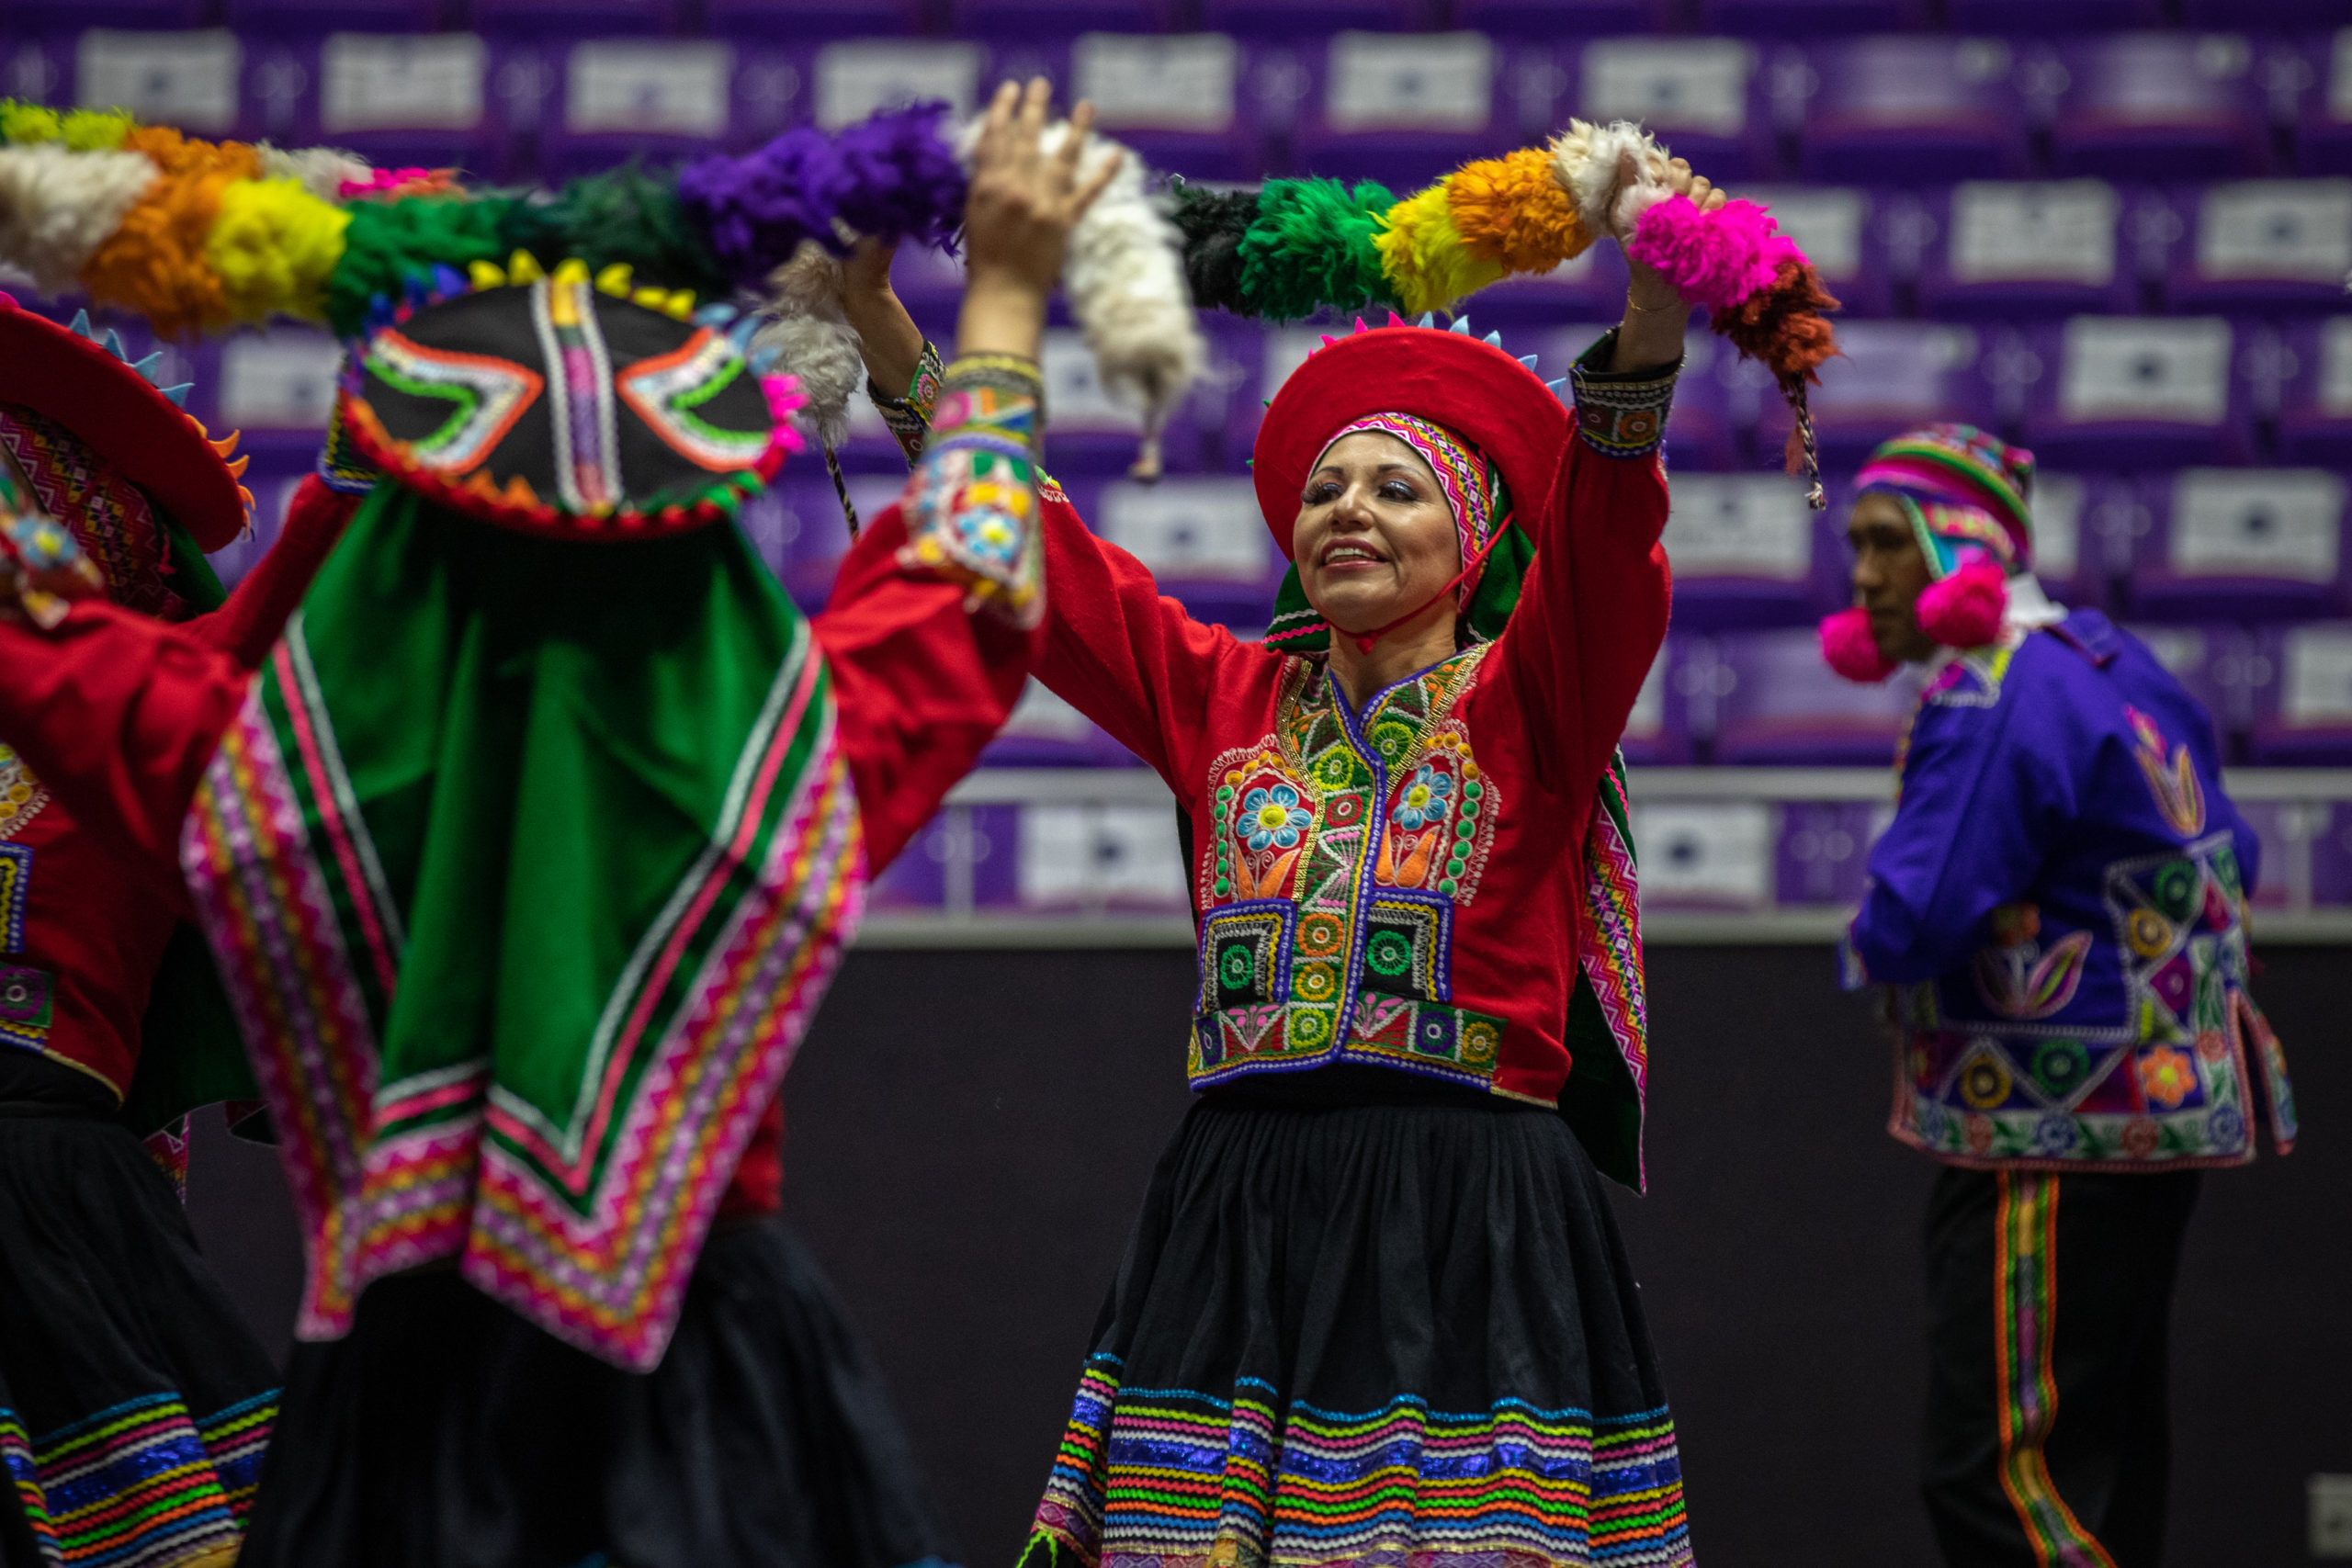 Weber State University graduates and community members gathered for the LatinX Grad Ceremony at the Dee Events Center on April 24, 2021.